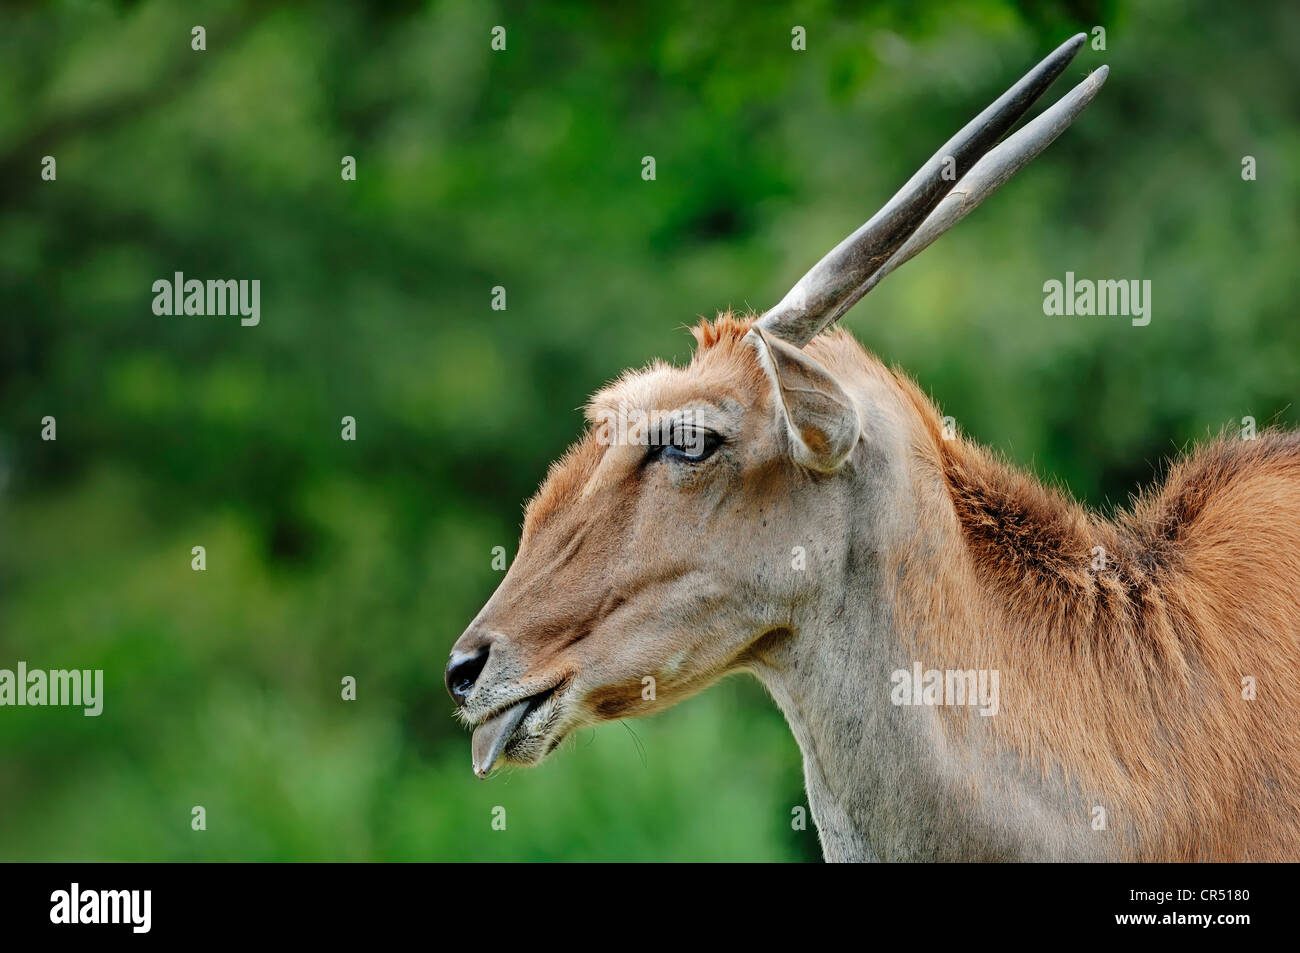 Common Eland (Taurotragus oryx), male, sticking out tongue, portrait, African species, captive, Czech Republic, Europe Stock Photo